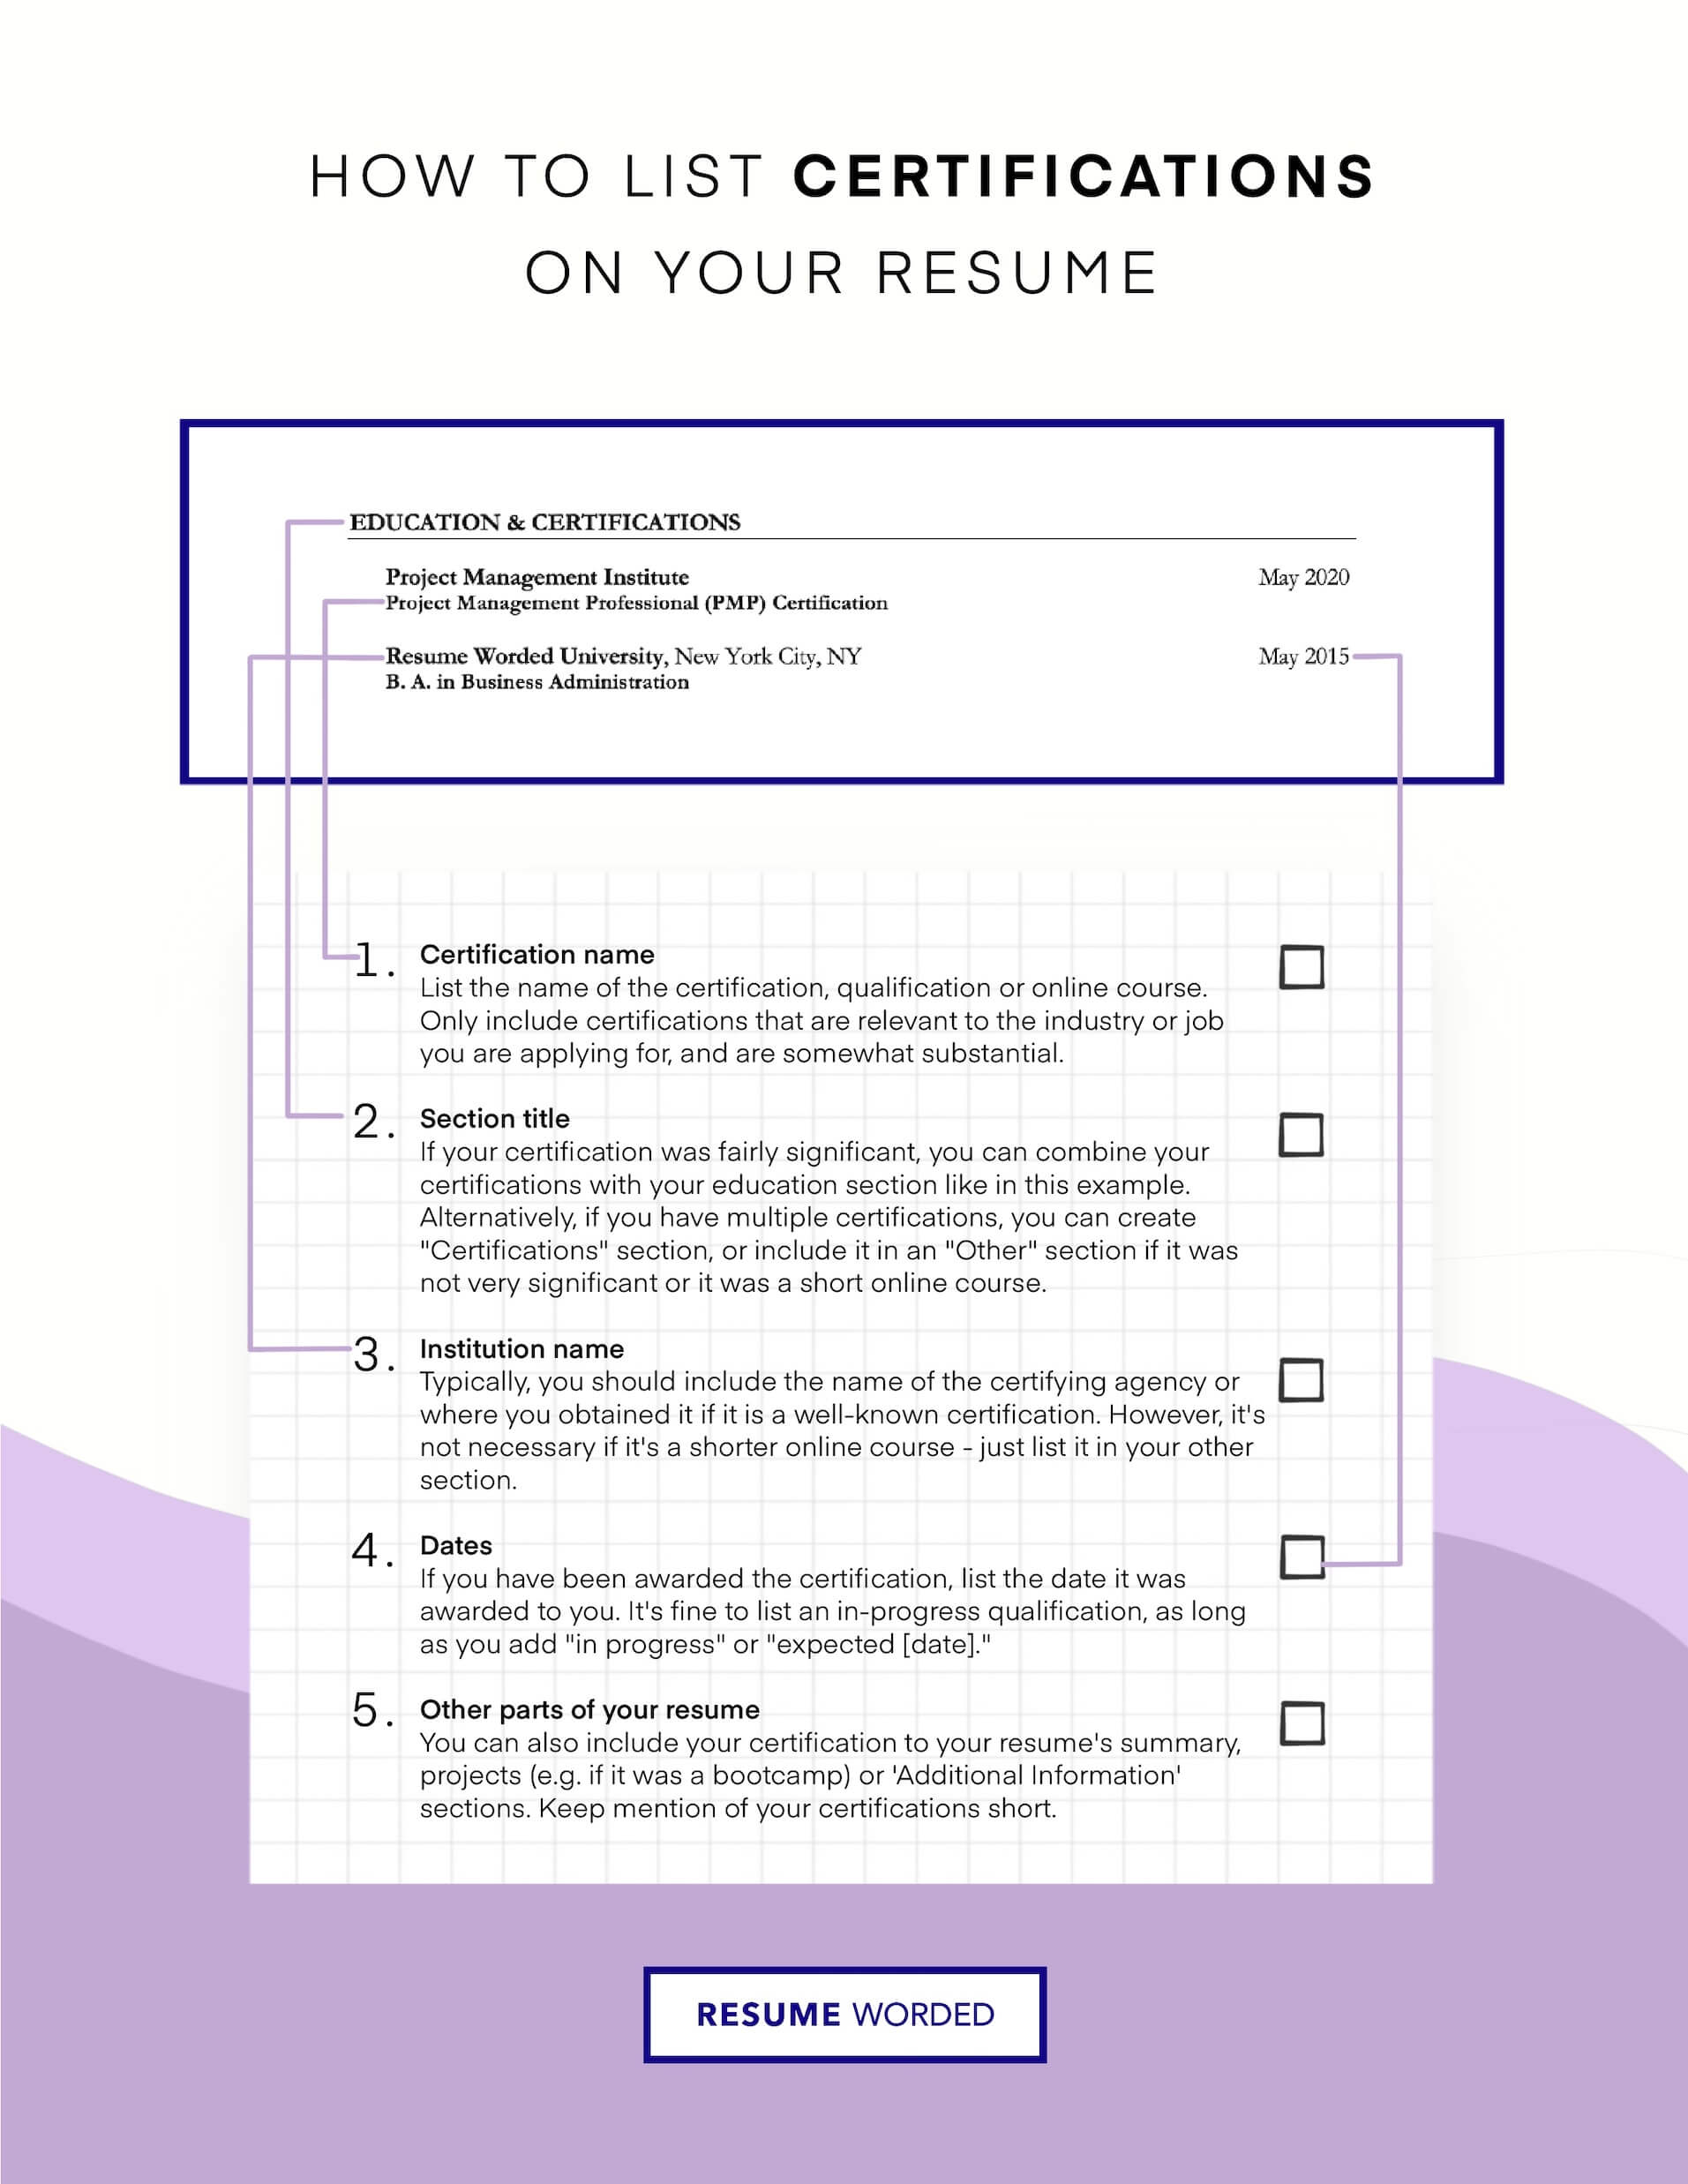 Include any advertising certification you may have. - Advertising Account Executive Resume